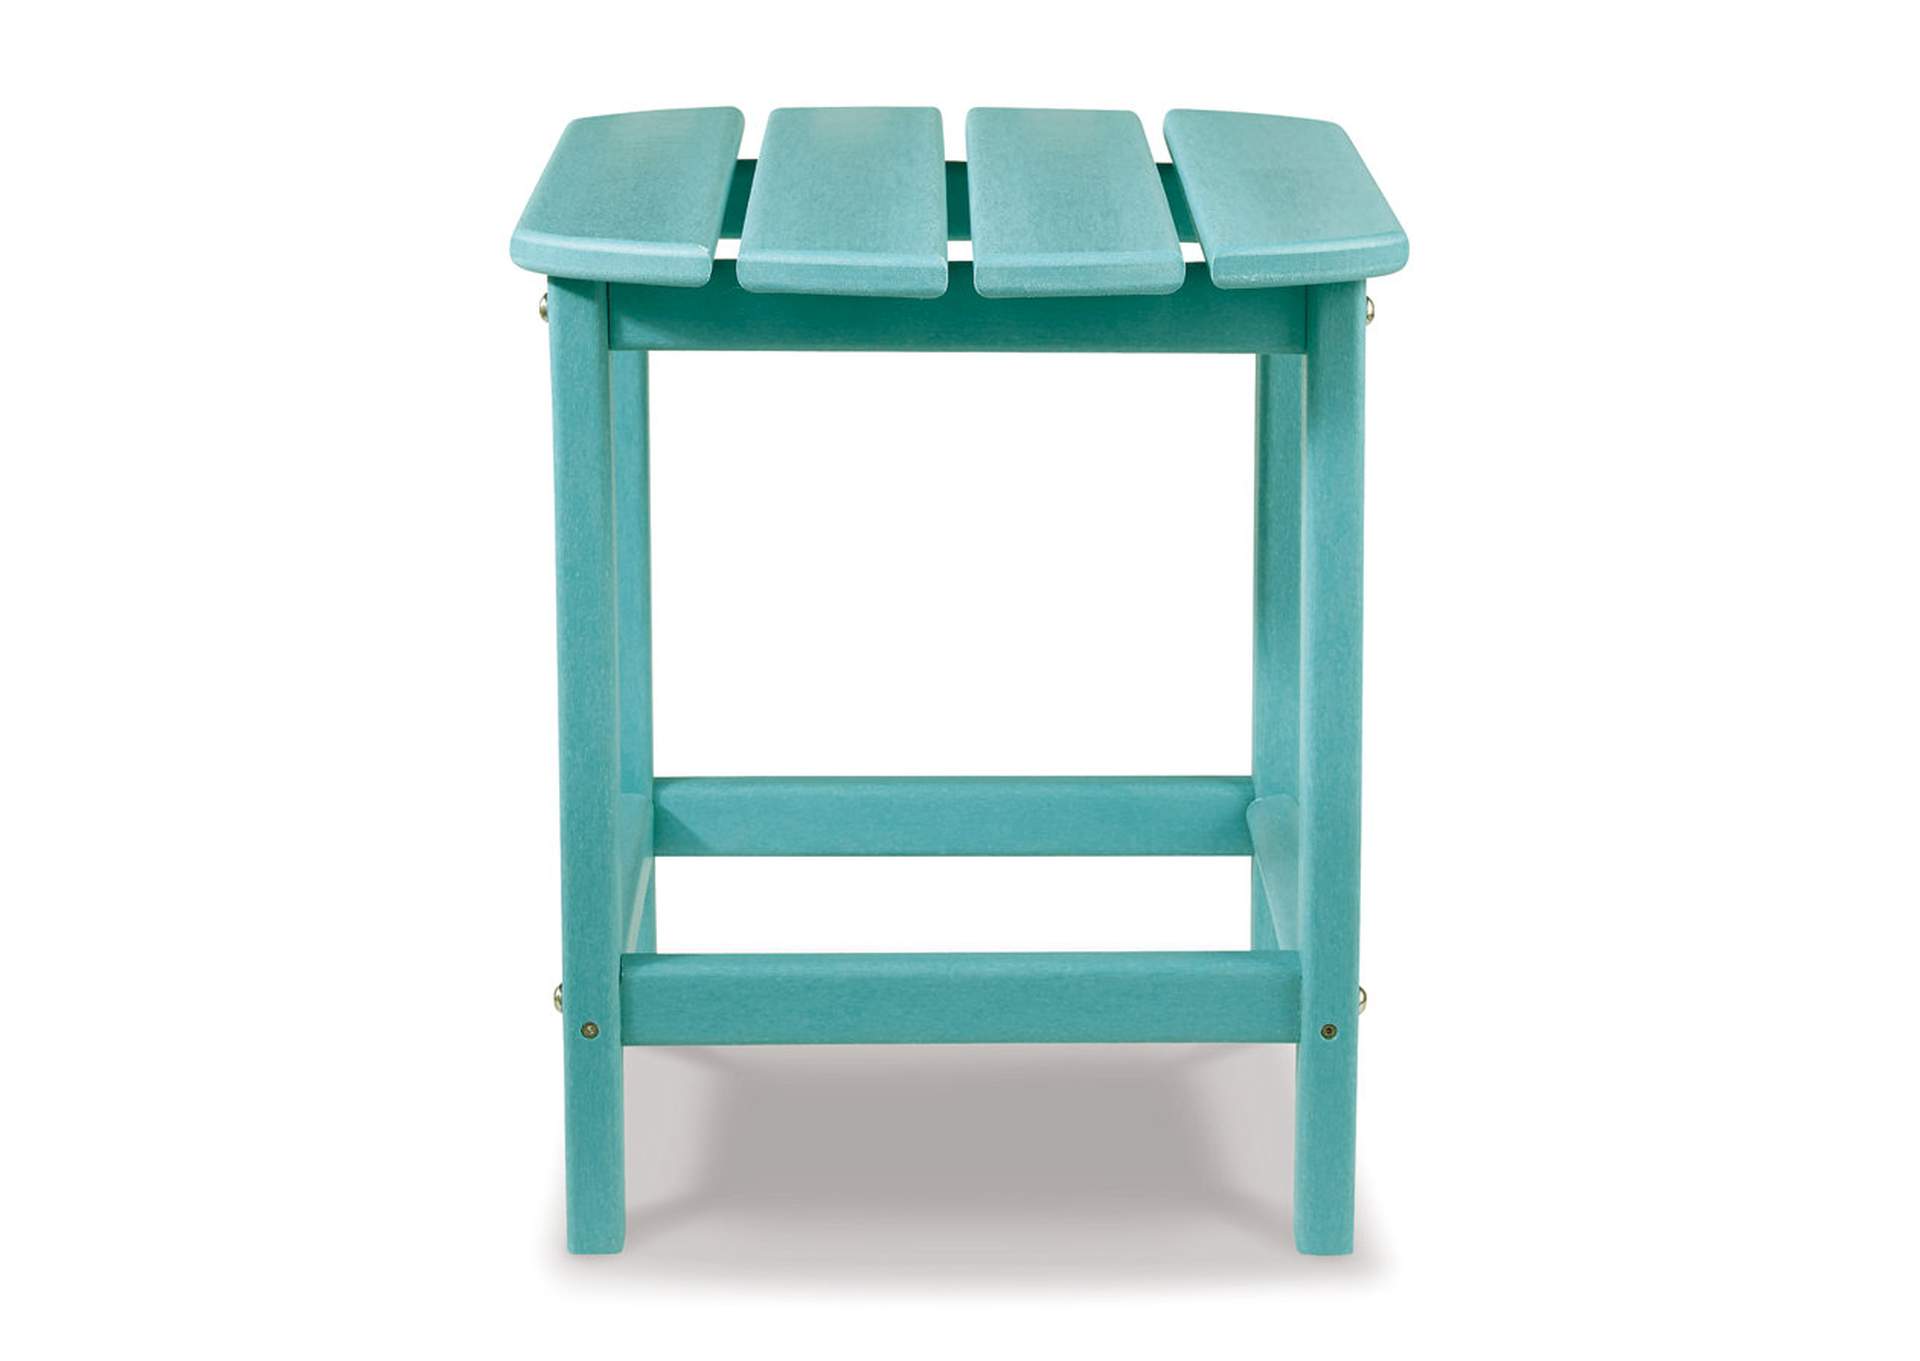 Sundown Treasure Outdoor Chair with End Table,Outdoor By Ashley